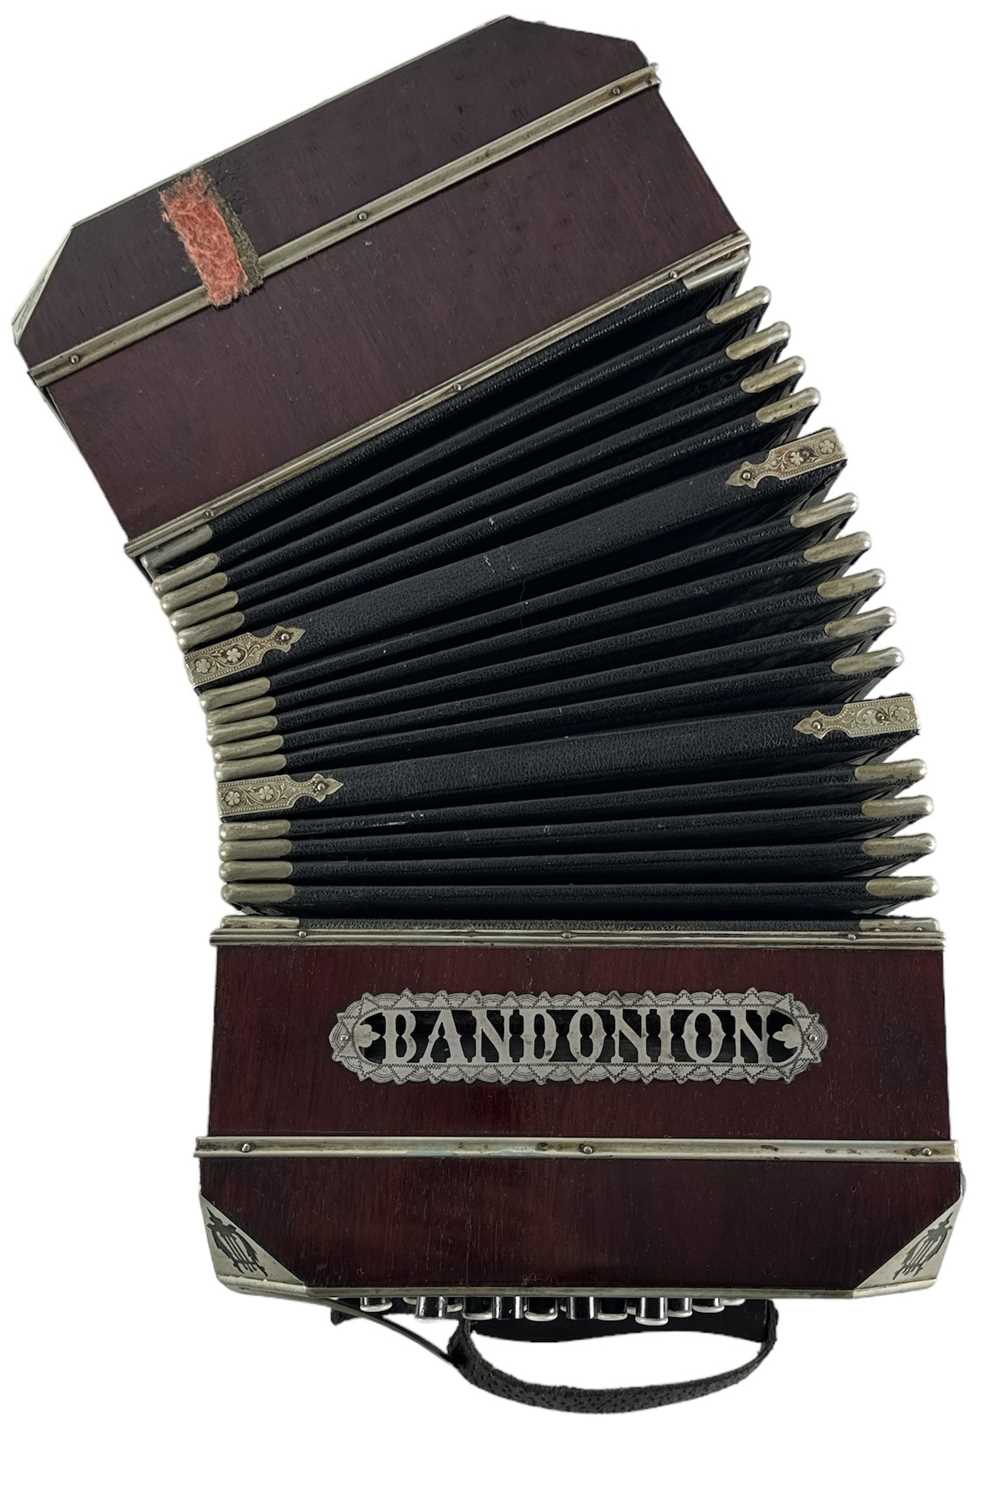 A late 19th/early 20th century bandoneon concertina, rosewood with mother of pearl mounted keys, - Image 2 of 2